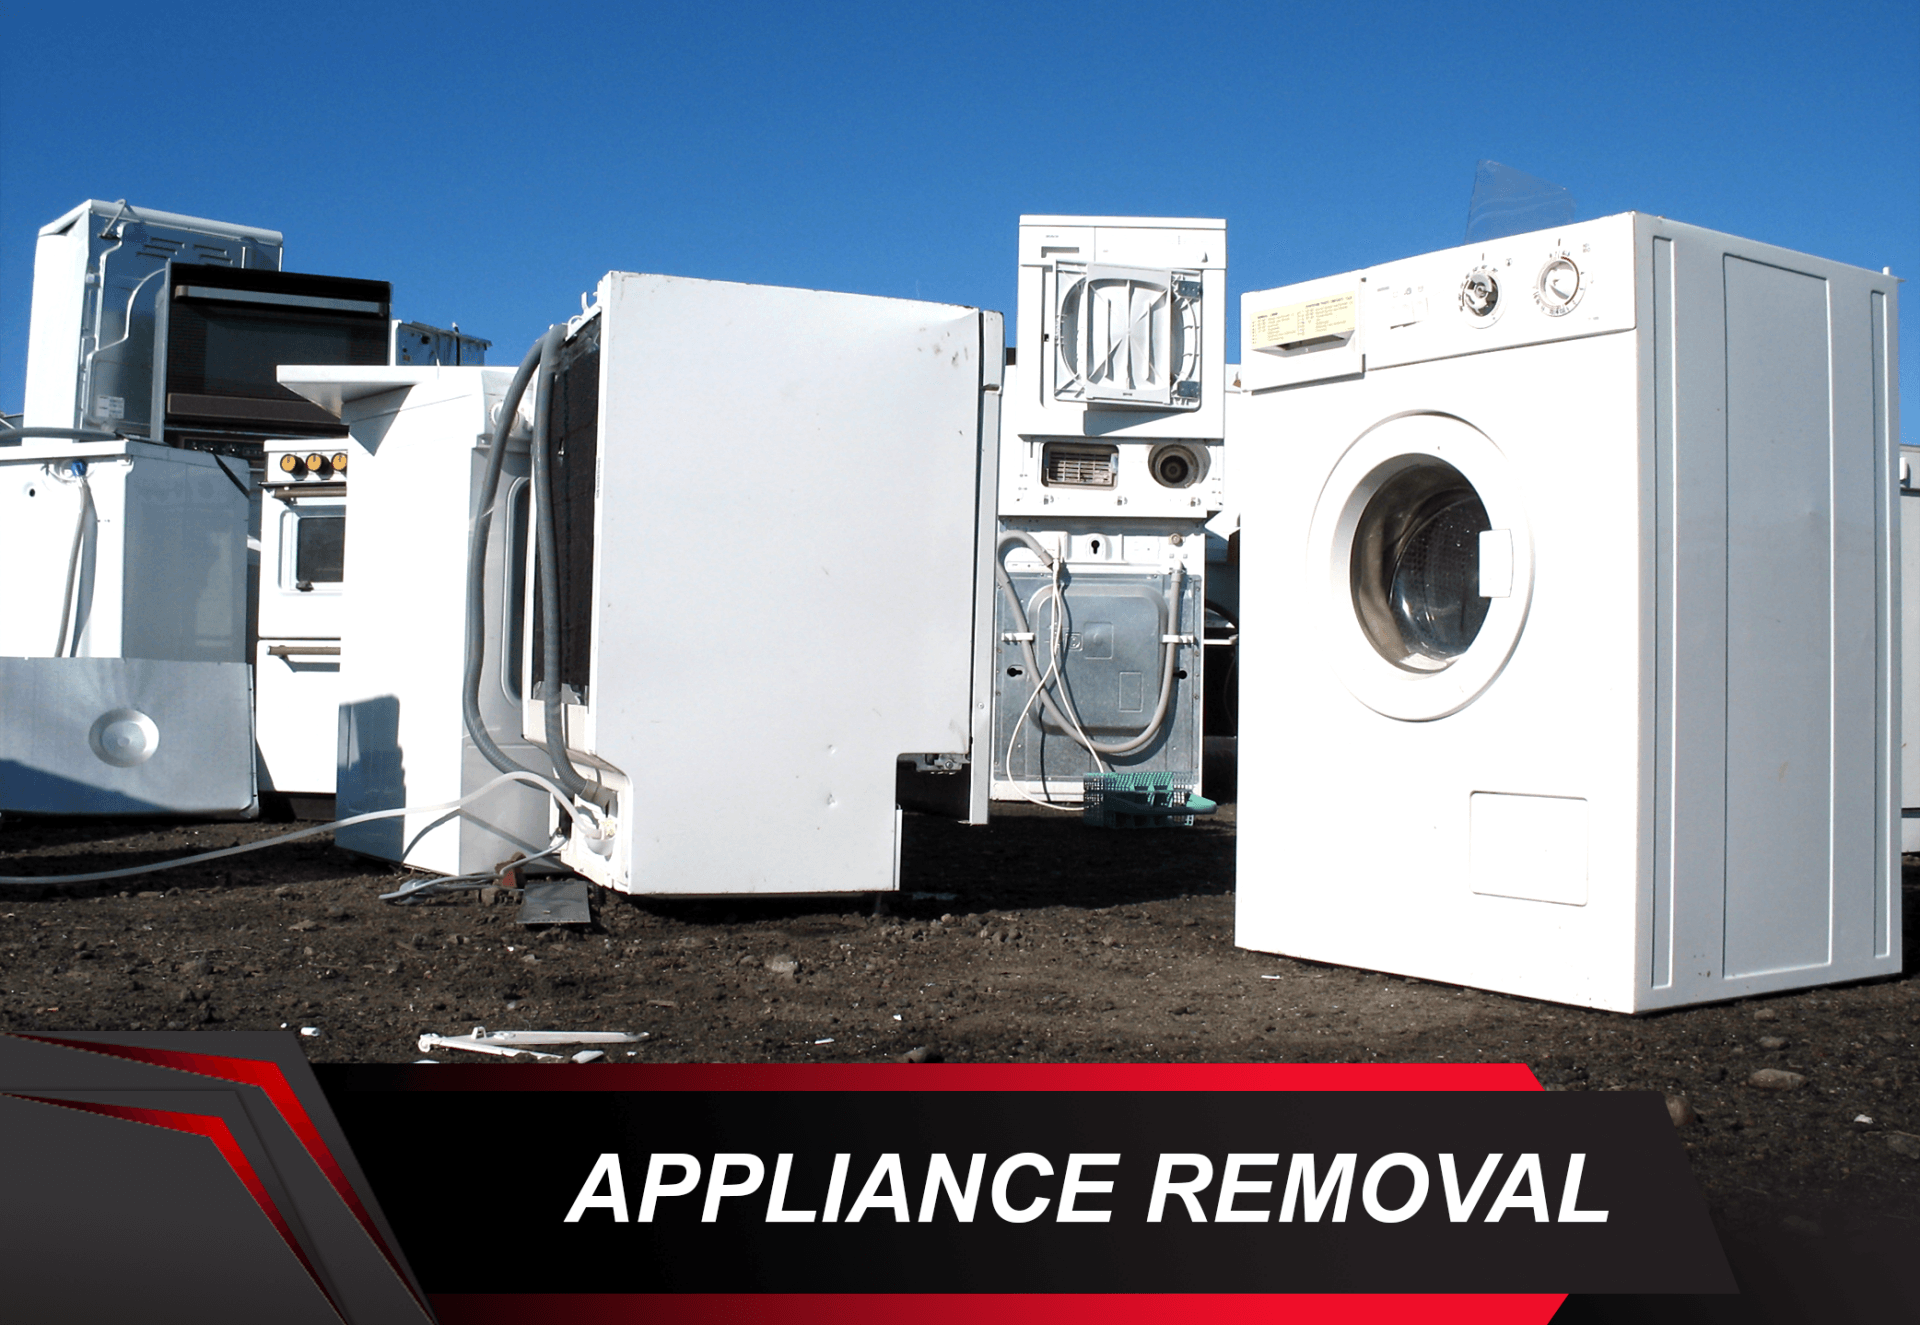 Appliance removal